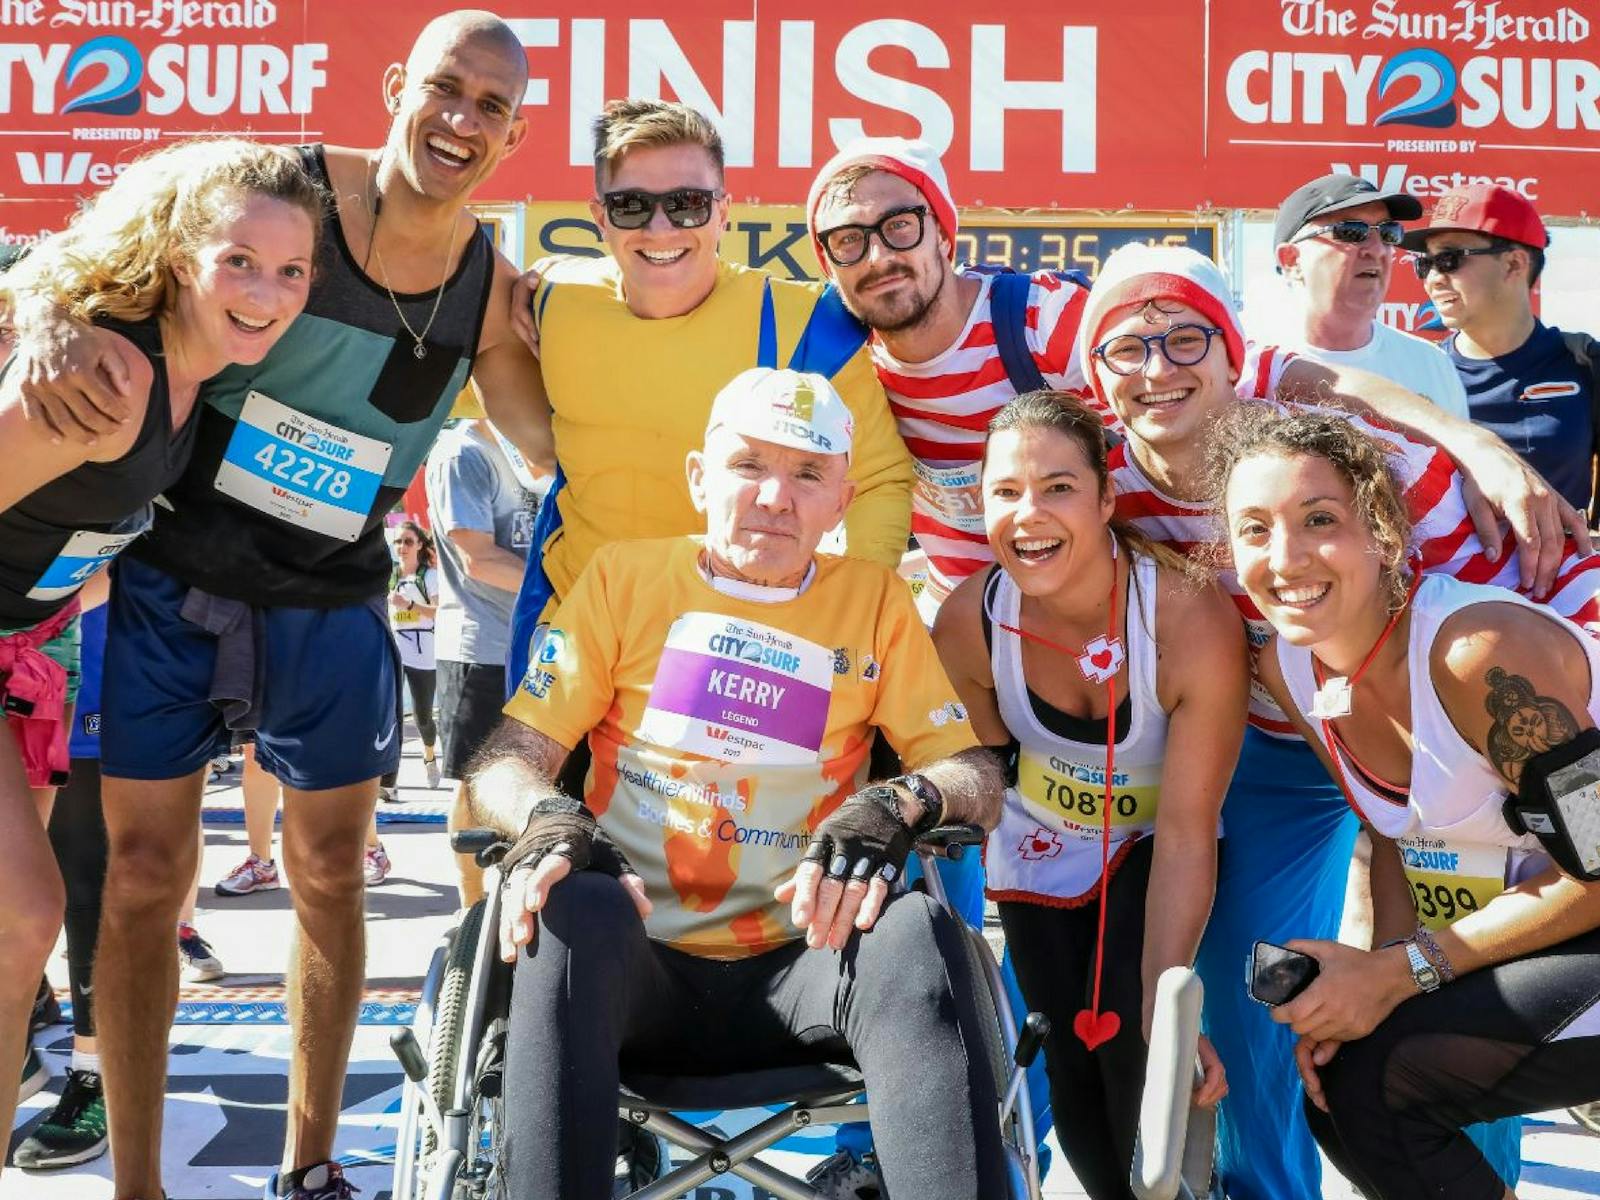 Image for The Sun-Herald City2Surf presented by Westpac